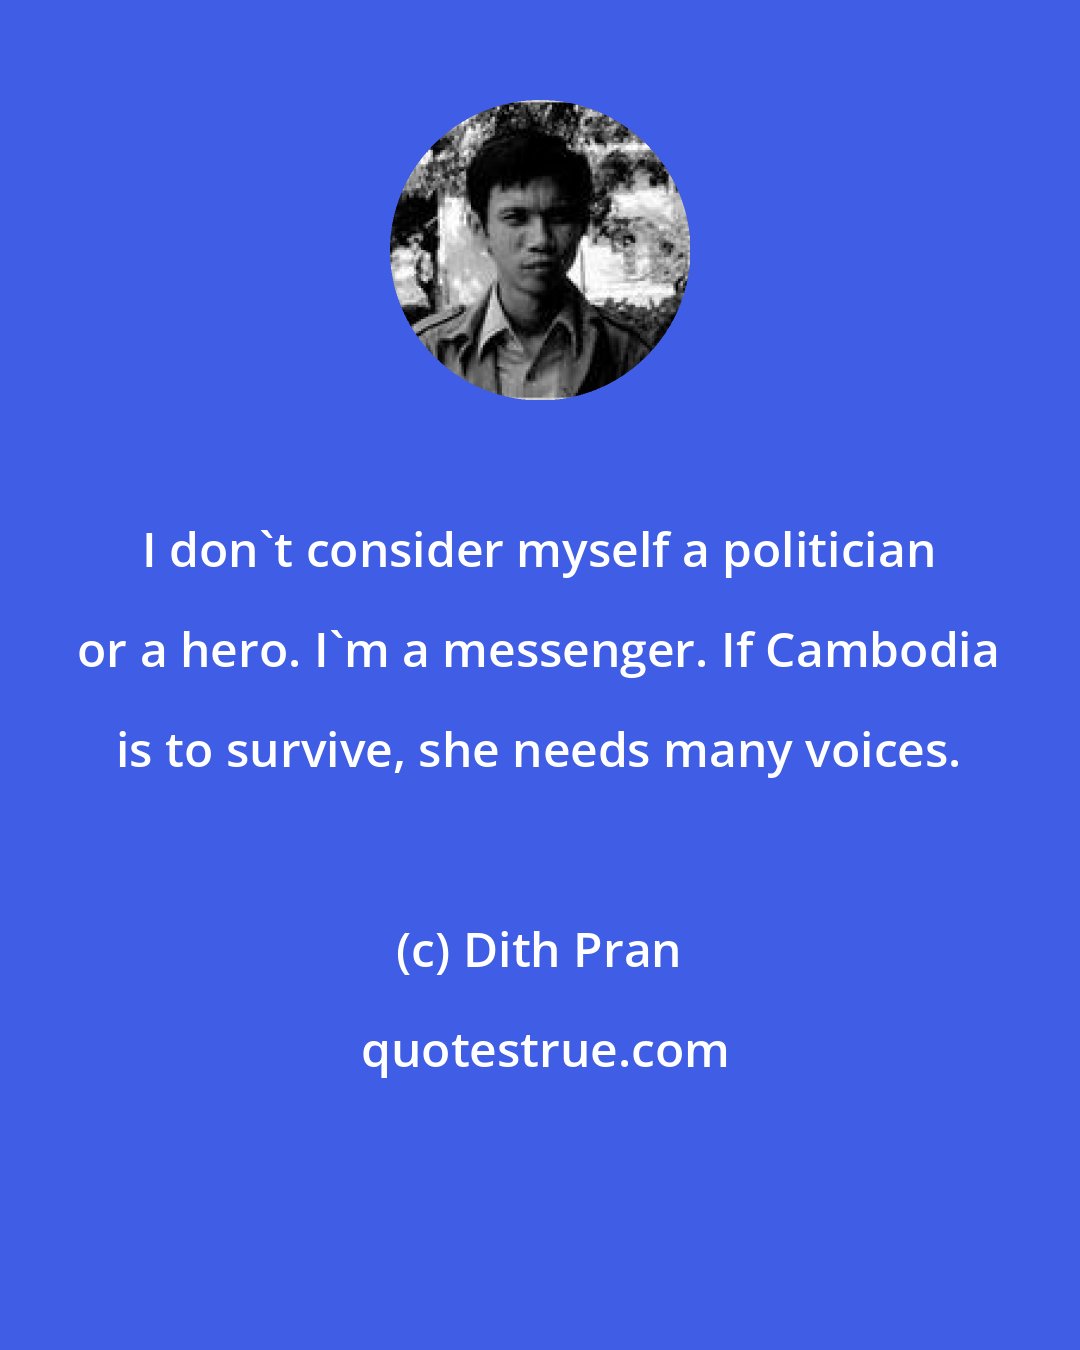 Dith Pran: I don't consider myself a politician or a hero. I'm a messenger. If Cambodia is to survive, she needs many voices.